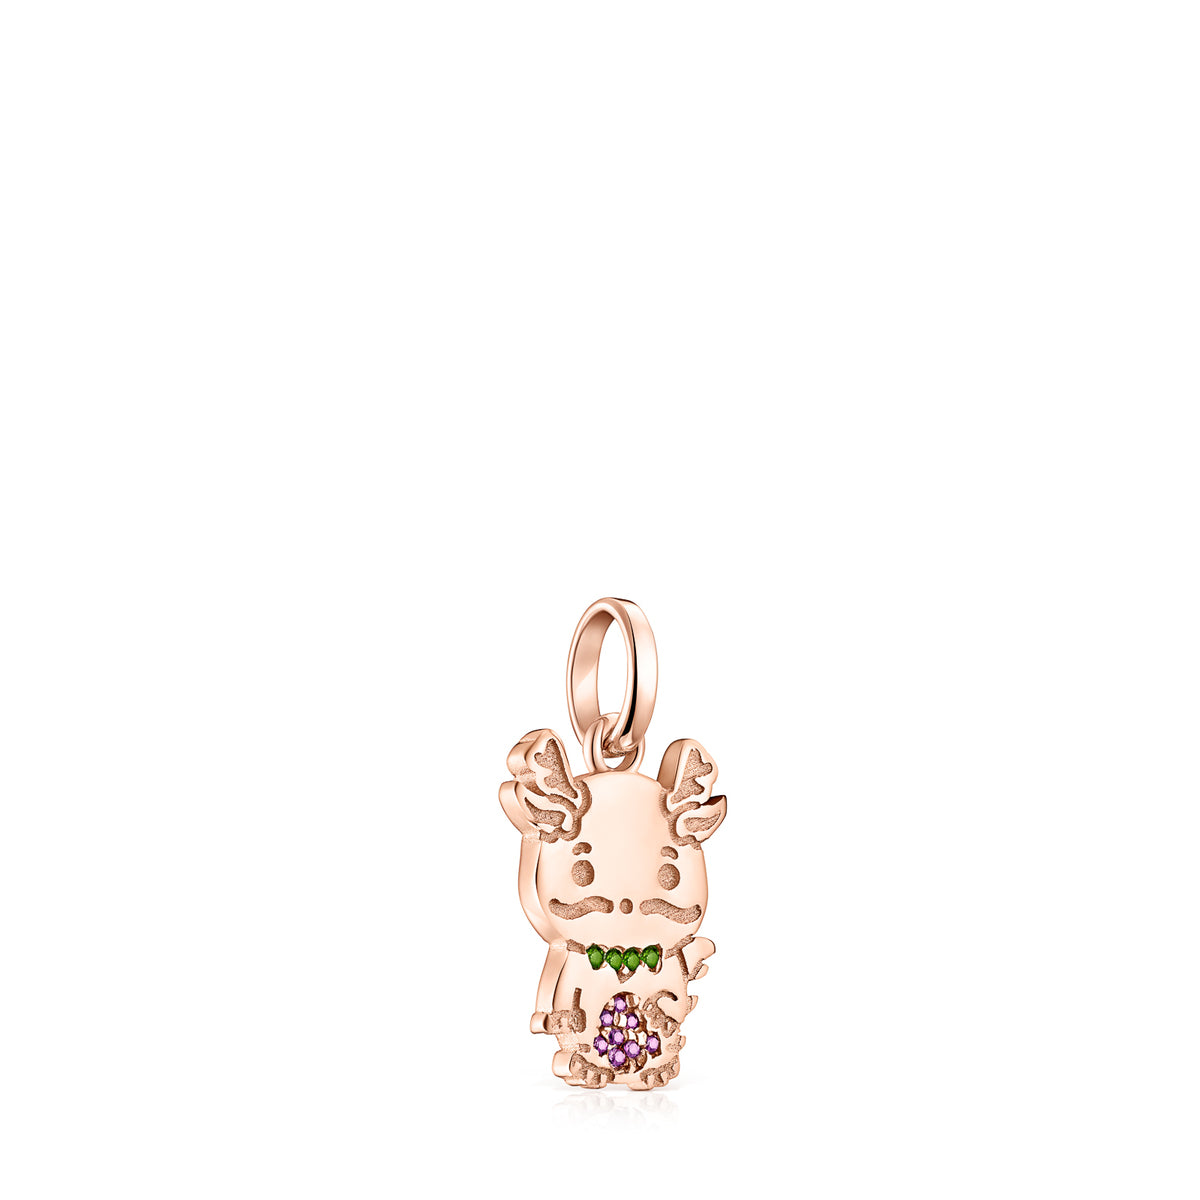 Tous Chinese Horoscope Dragon Pendant in Rose Gold Vermeil, Ruby and Chrome Diopside 918434560